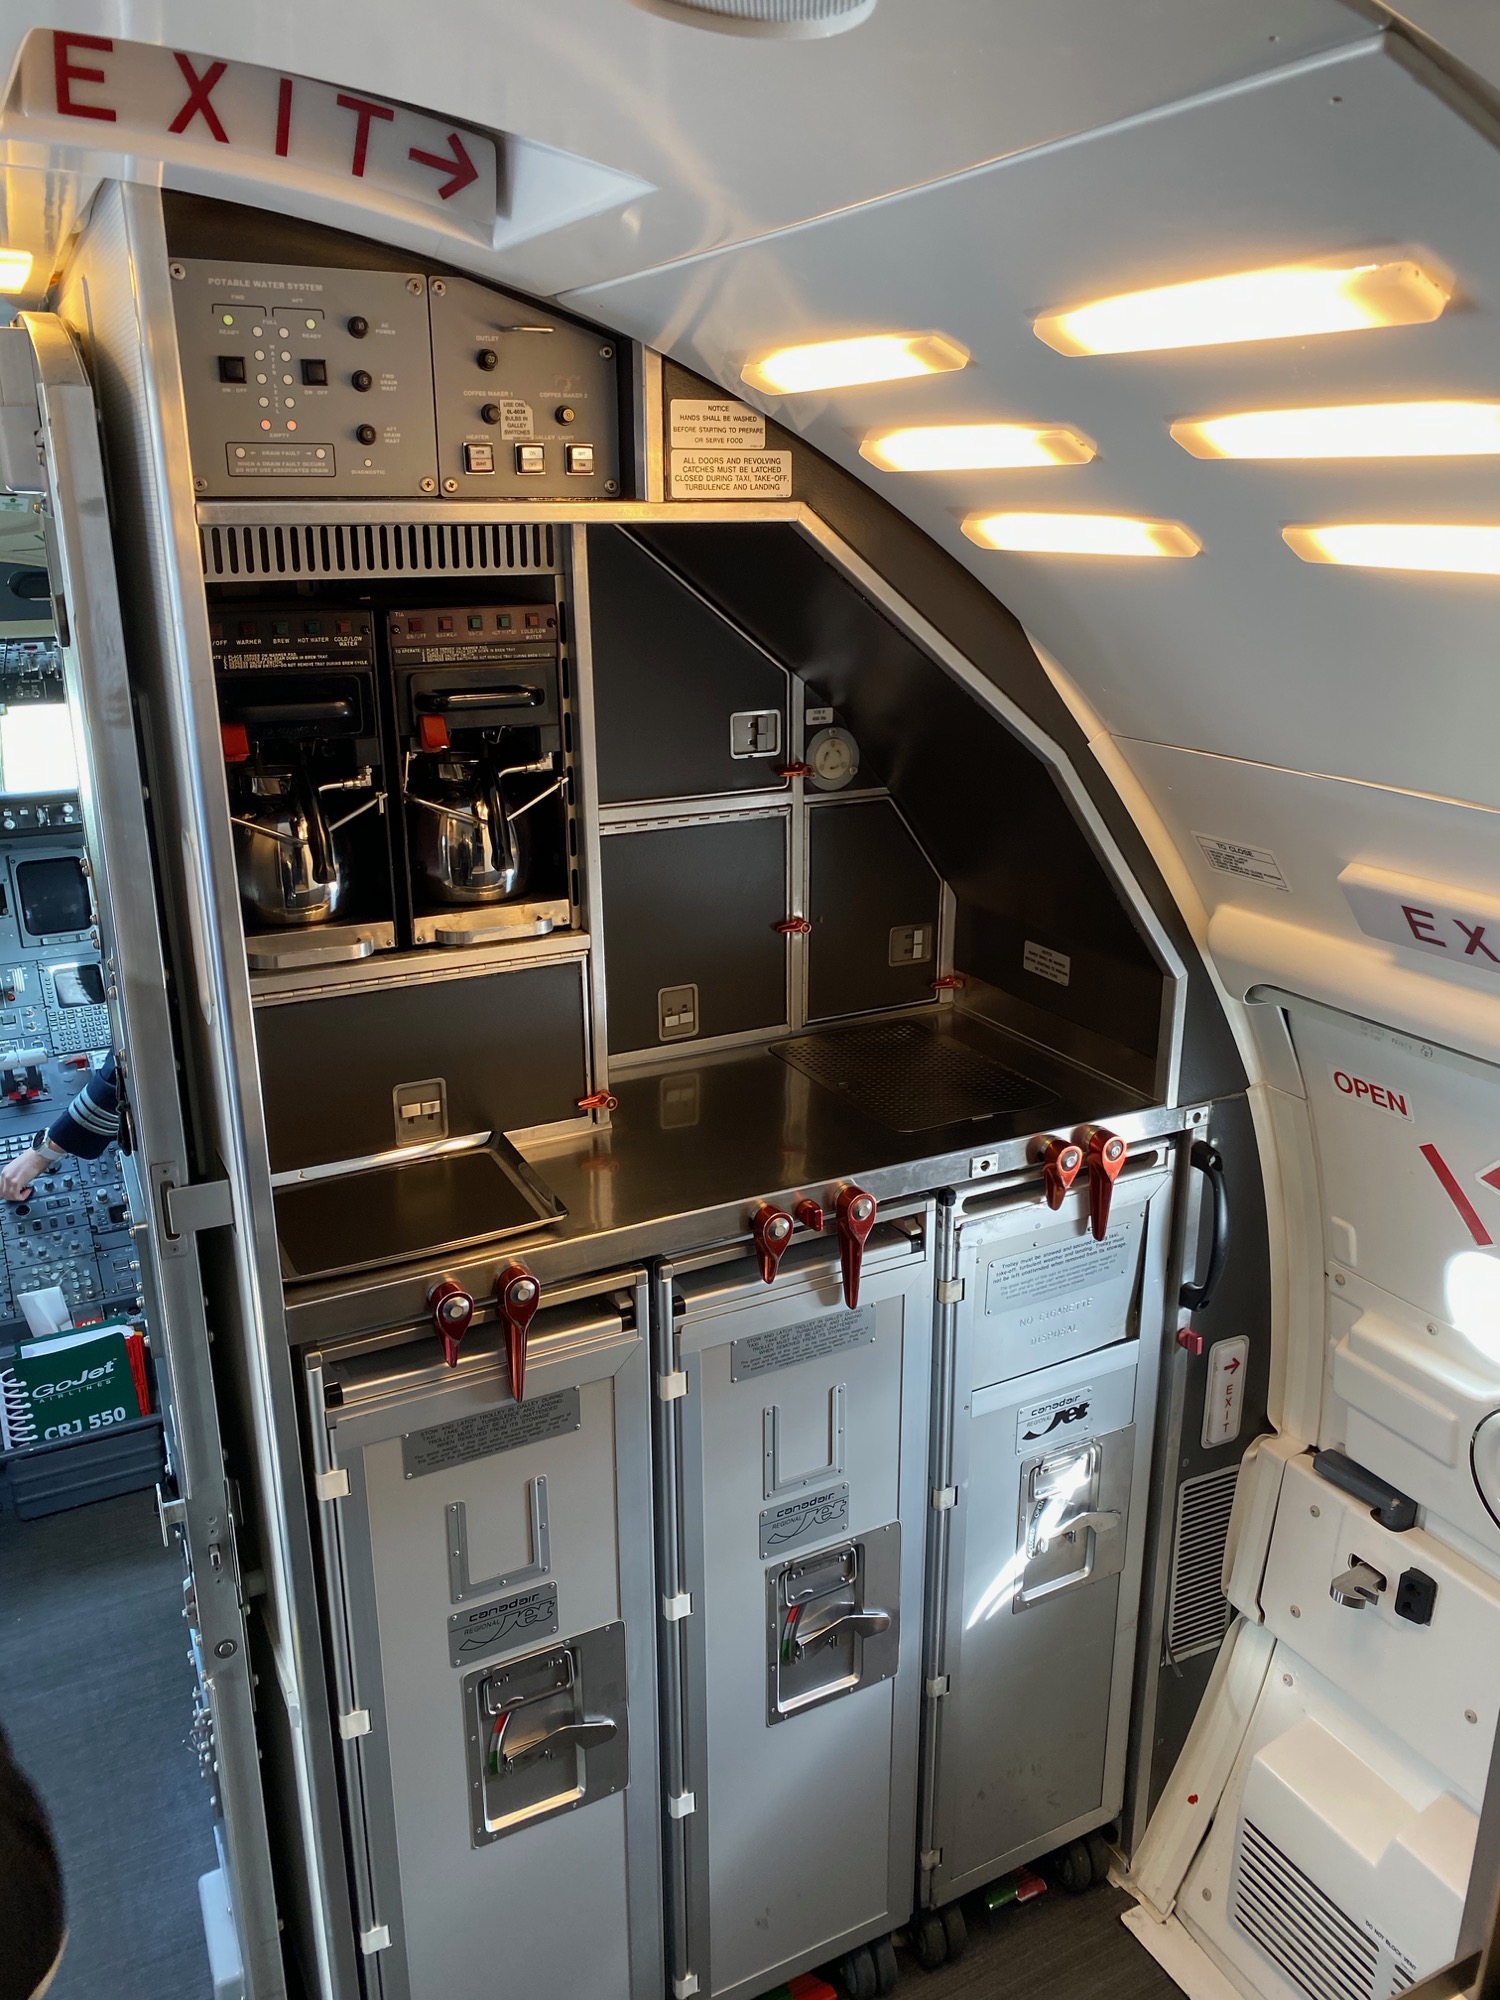 a kitchen in an airplane